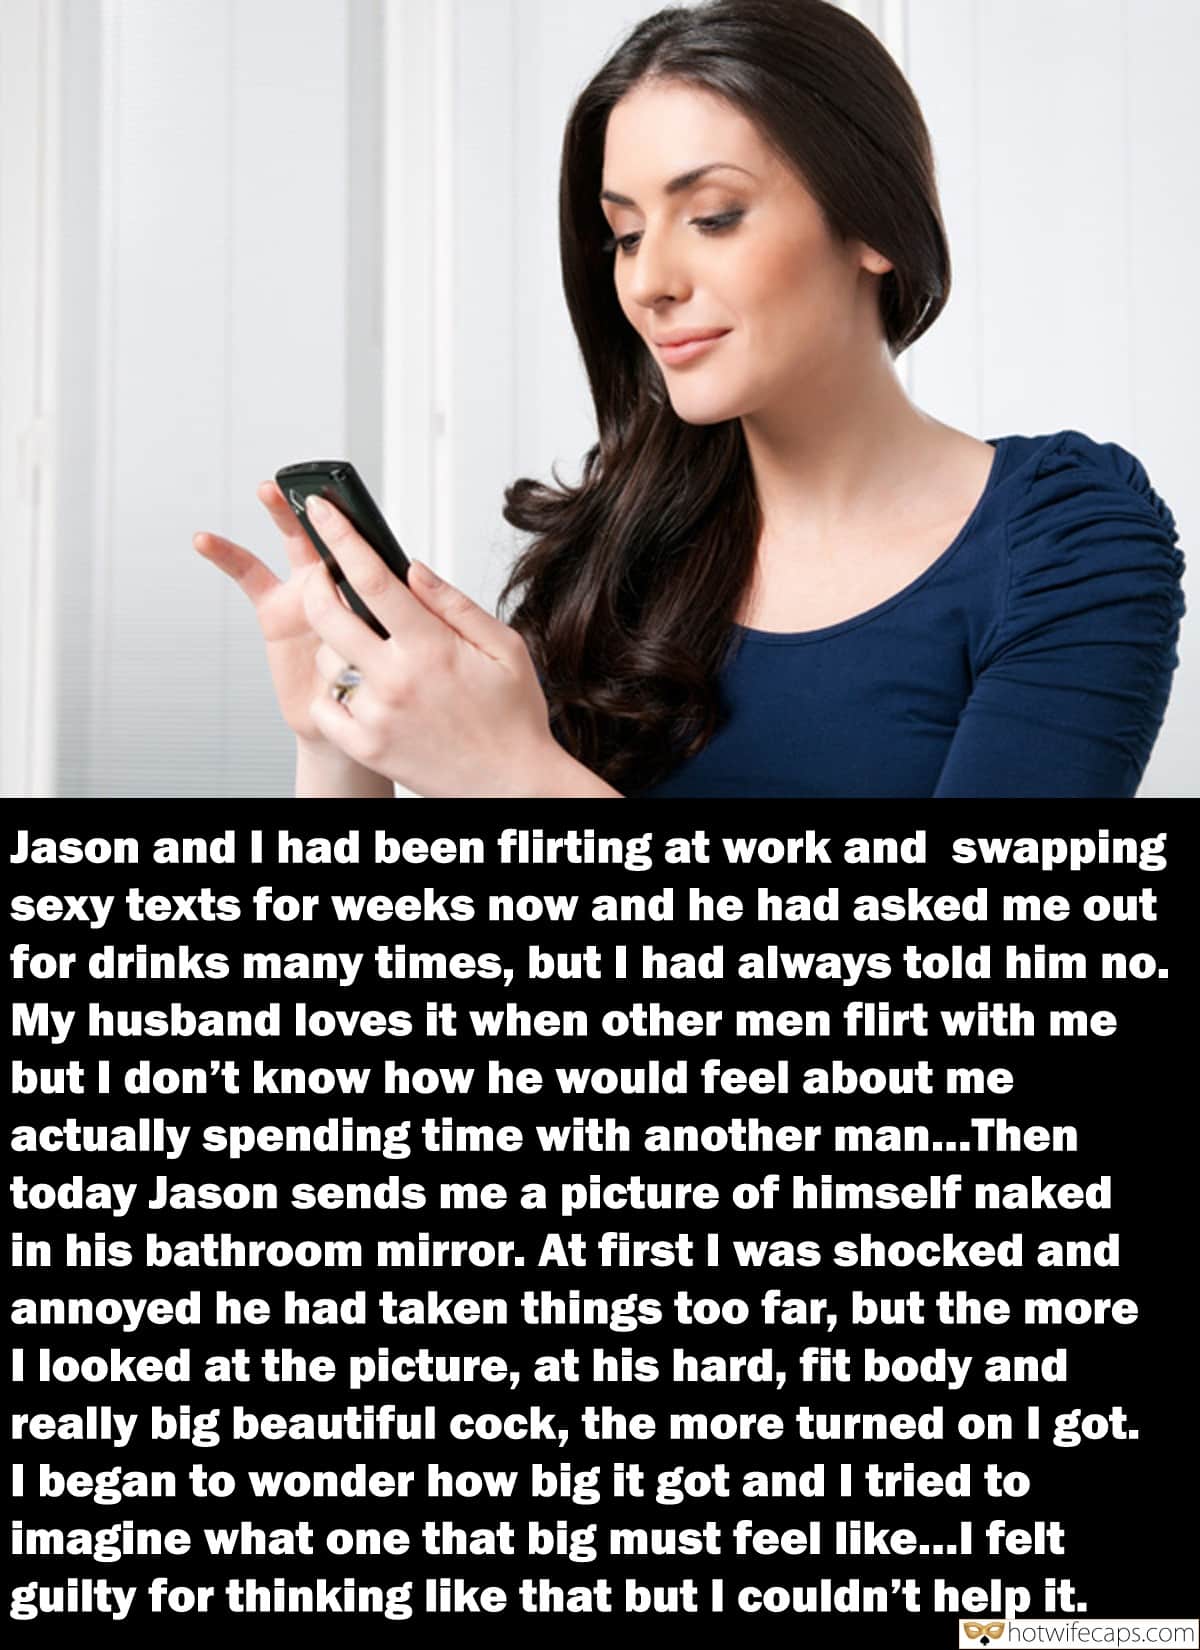 Cuckold Stories  hotwife caption: Jason and I had been flirting at work and swapping sexy texts for weeks now and he had asked me out for drinks many times, but I had always told him no. My husband loves it when other men flirt...